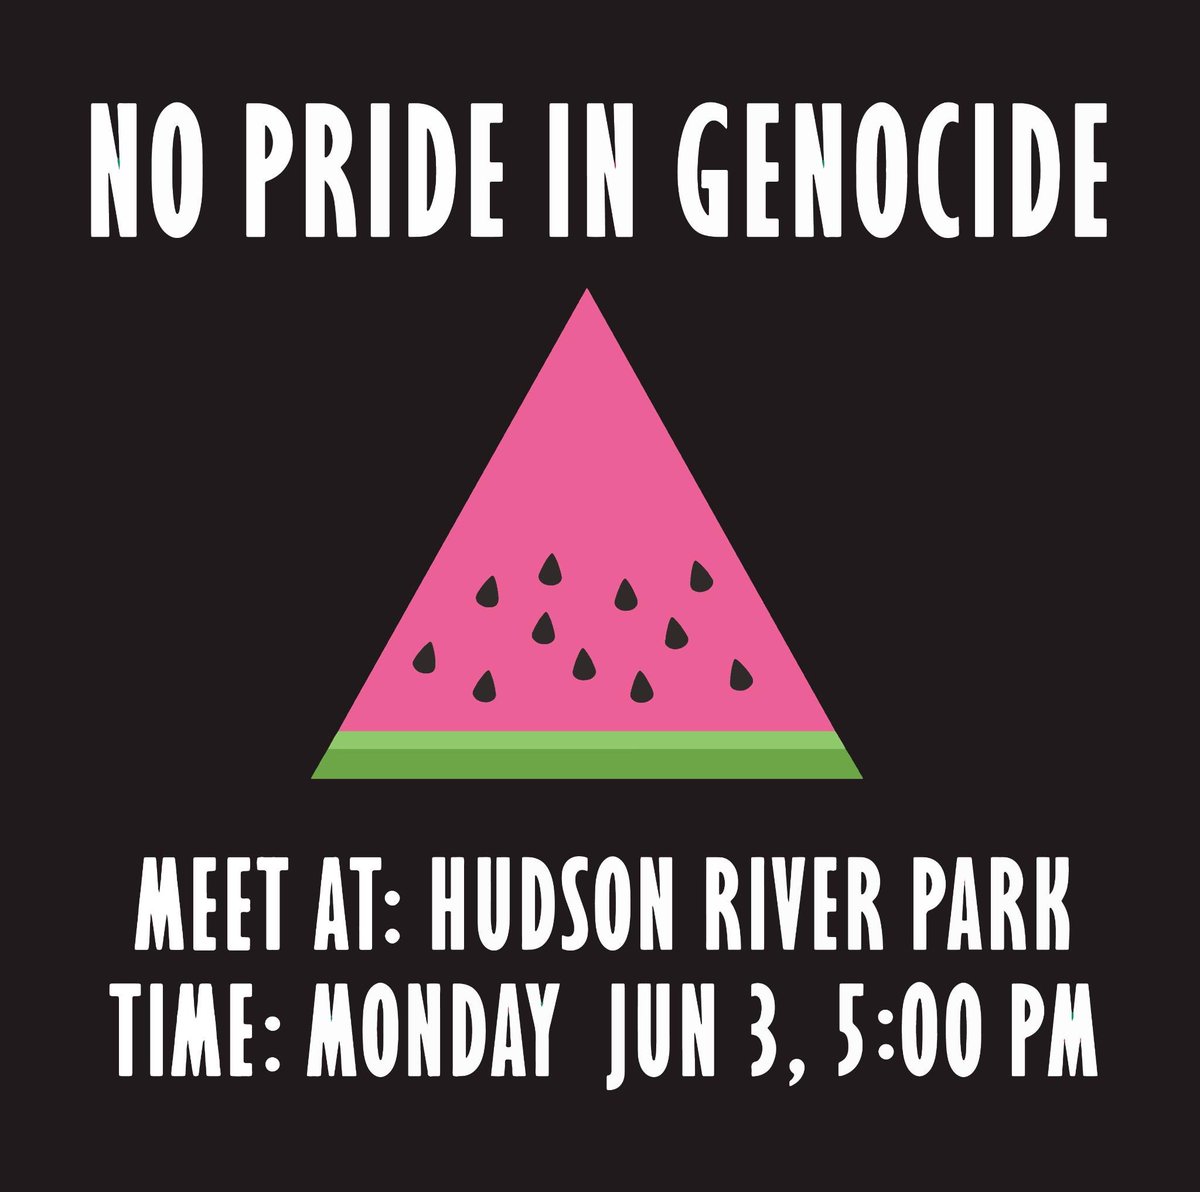 NO PRIDE IN GENOCIDE: On June 3 Join @actupny and Queer & Trans people of conscience on the first Monday of Pride Month at Hudson River Park at 5PM, to ask Outright International, the leading global LGBTQIA+ rights organization, WHERE IS YOUR OUTRAGE?